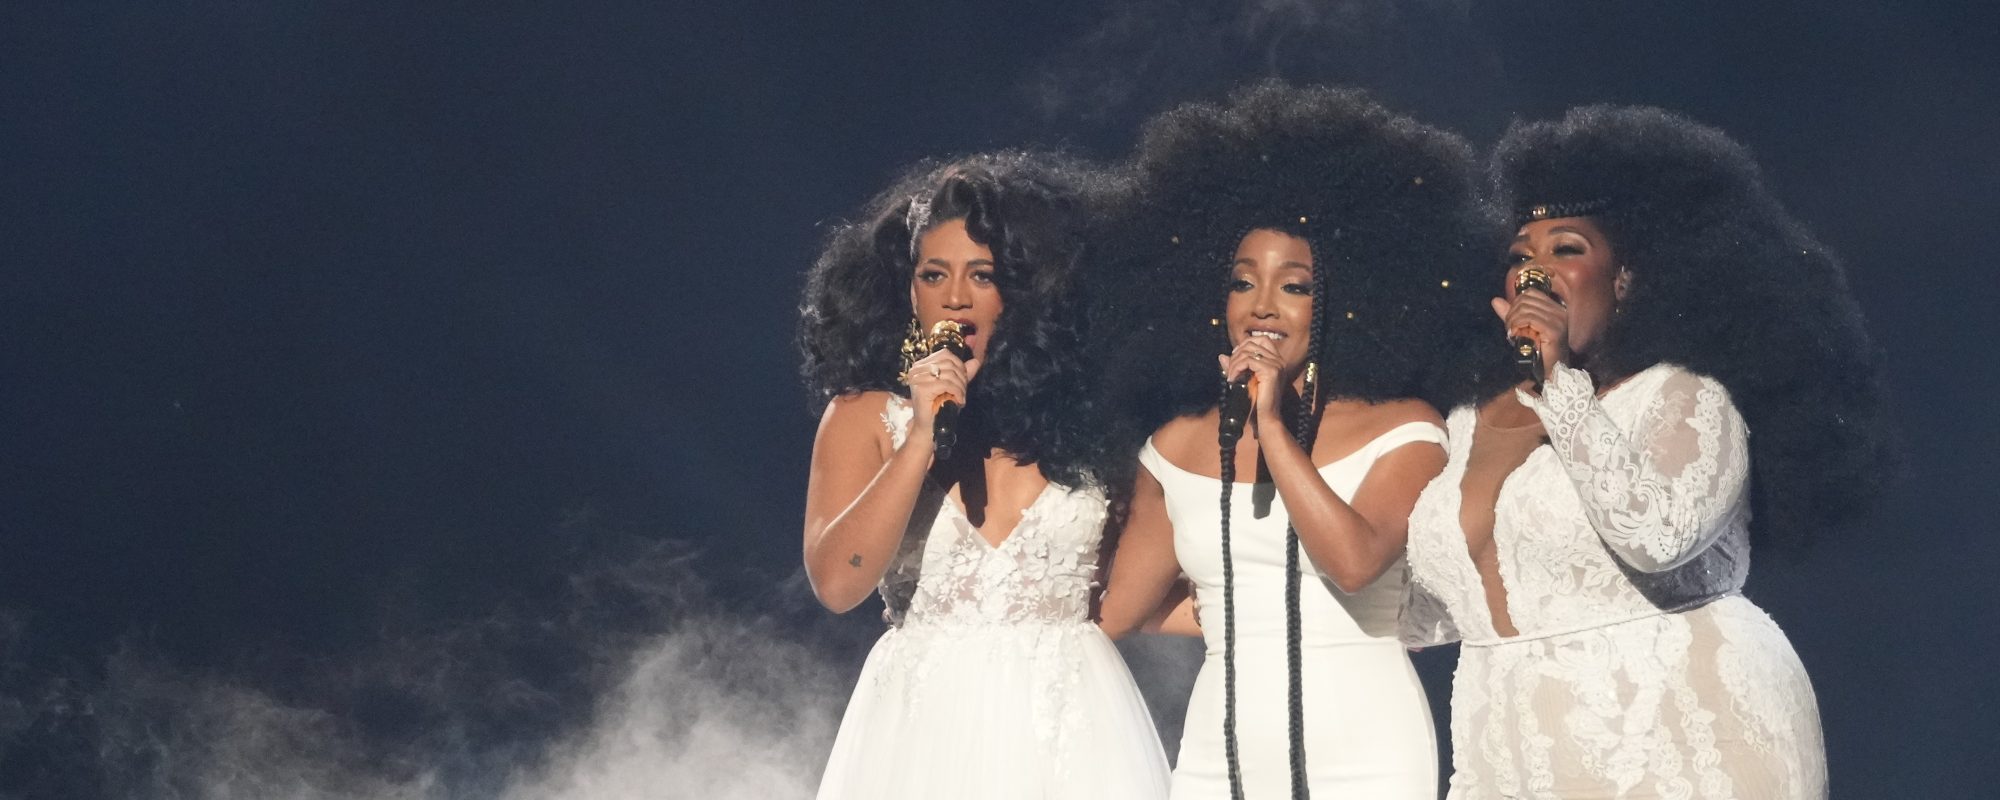 CMA Awards: Mickey Guyton, Brittney Spencer, and Madeline Edwards Come Together For Empowering Performance of “Love My Hair”